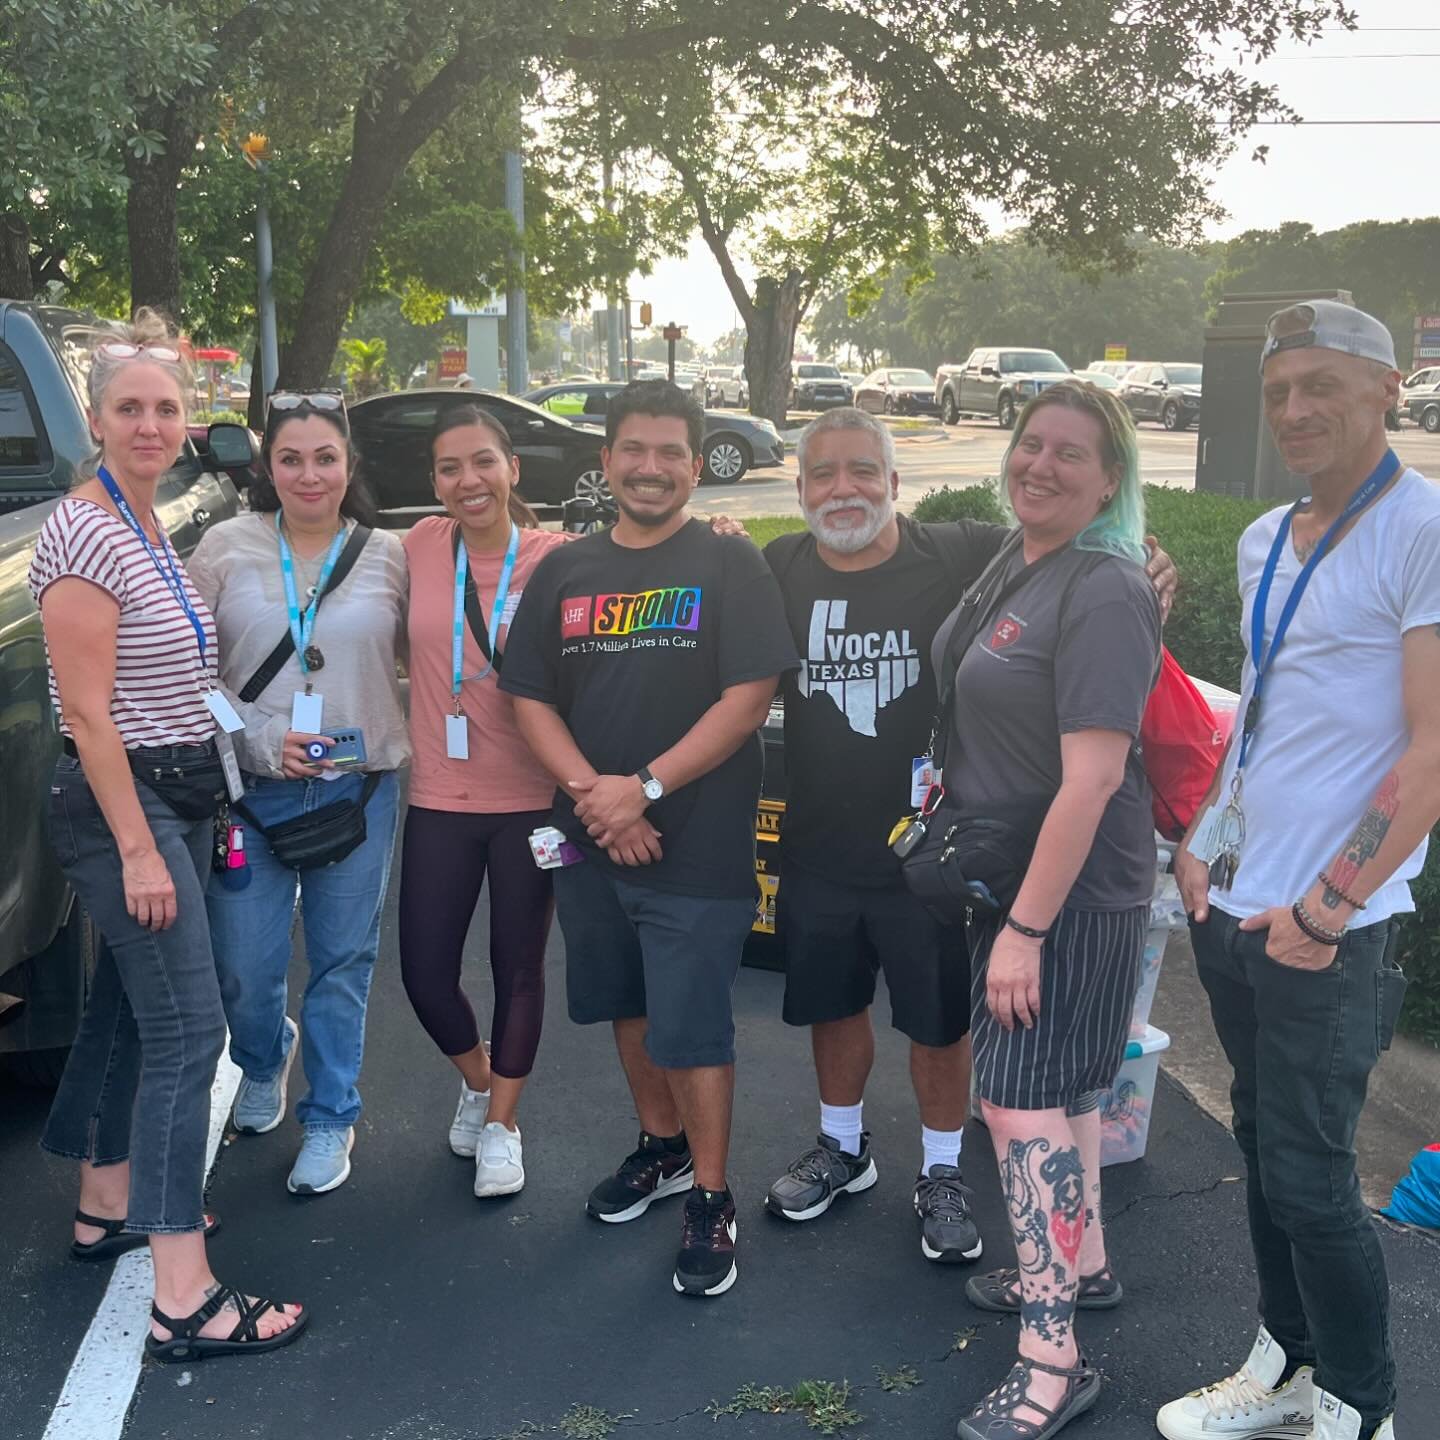 Last week, Sunrise Mobile led several partner organizations in the 2nd annual &ldquo;Night Reach&rdquo; evening outreach event in the area of Southpark Meadows shopping center.

When it gets very hot during the day, sometimes the best time to meet pe